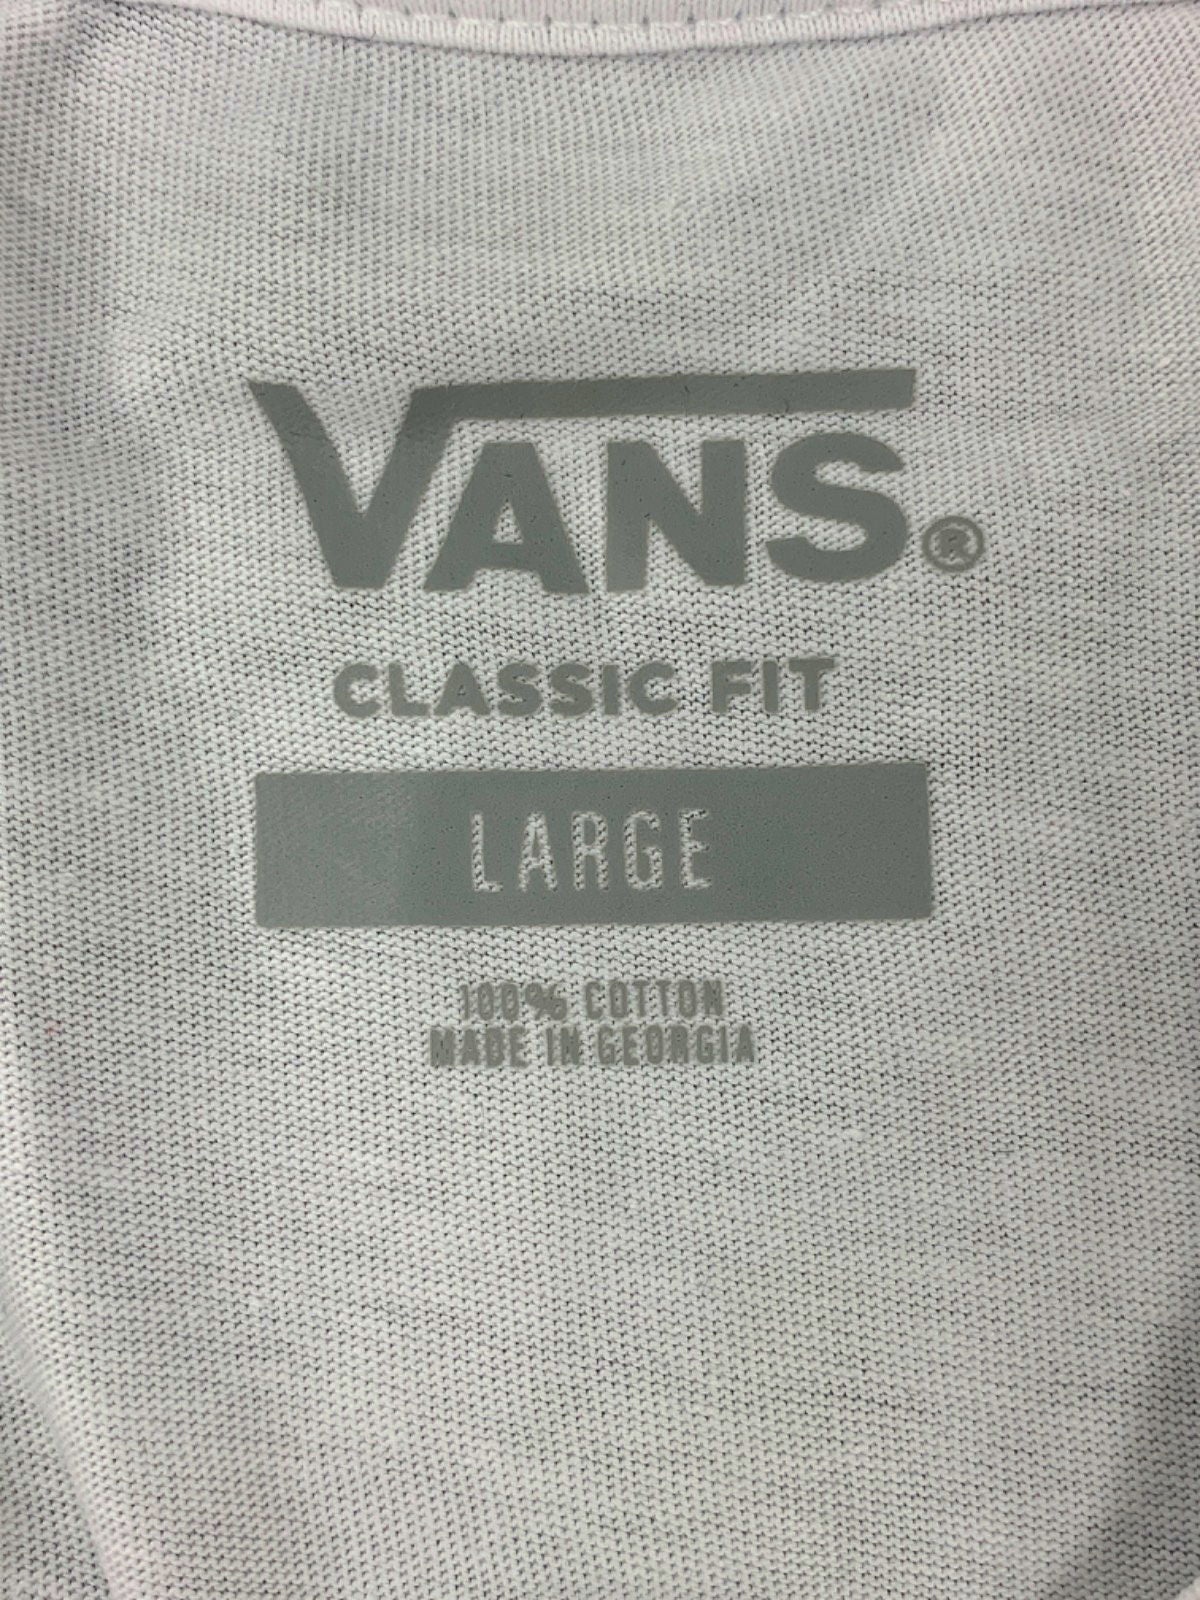 Vans White 'Staying Grounded SS' T-shirt Large